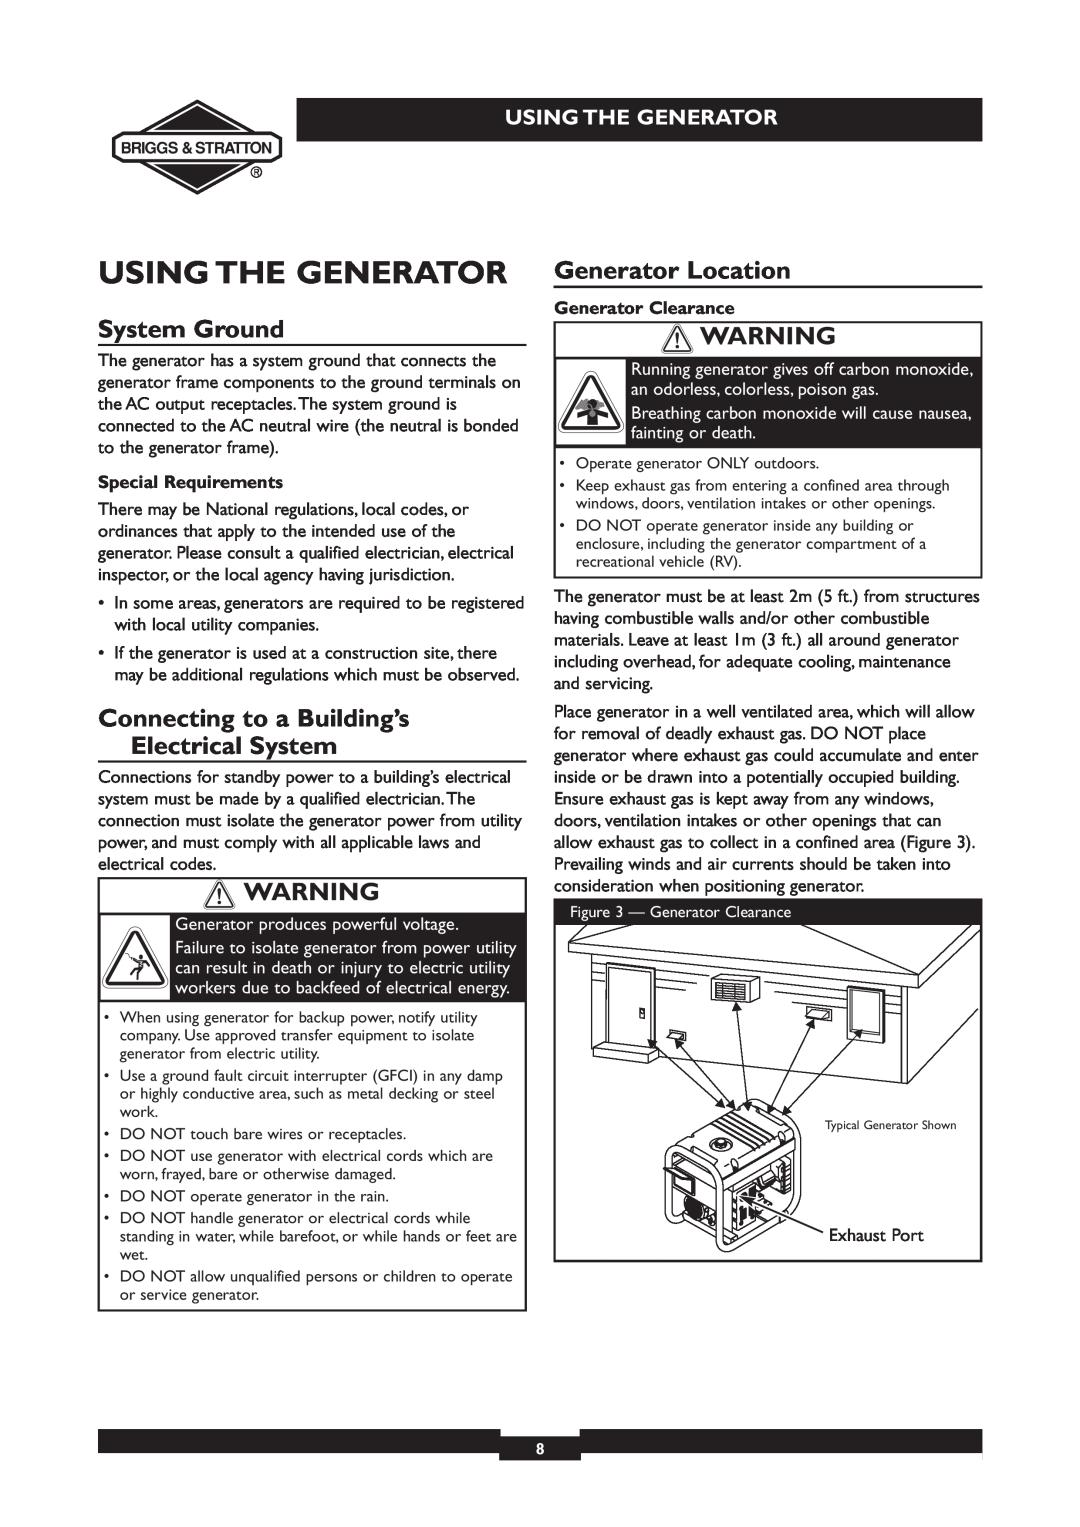 Briggs & Stratton 030213, 030212 Using The Generator, System Ground, Connecting to a Building’s Electrical System 